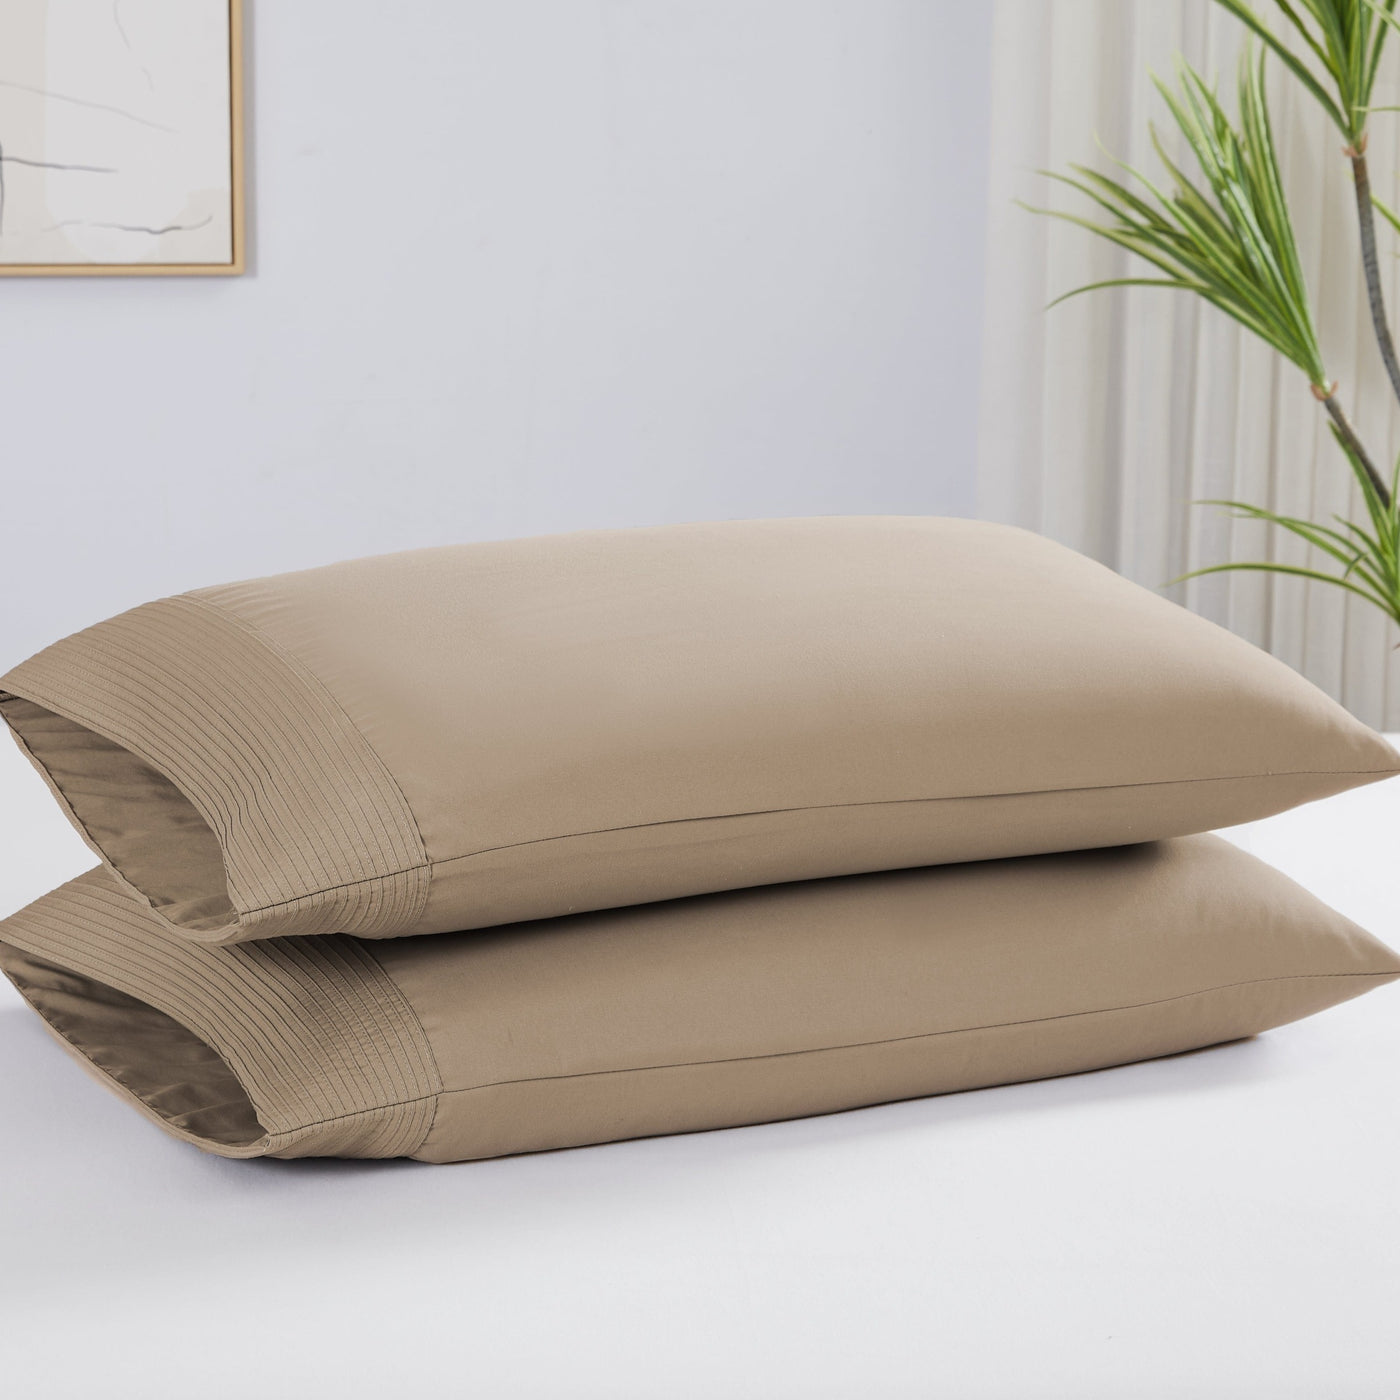 Two Vilano Pleated Pillow Cases in Taupe Stack Together#color_vilano-taupe